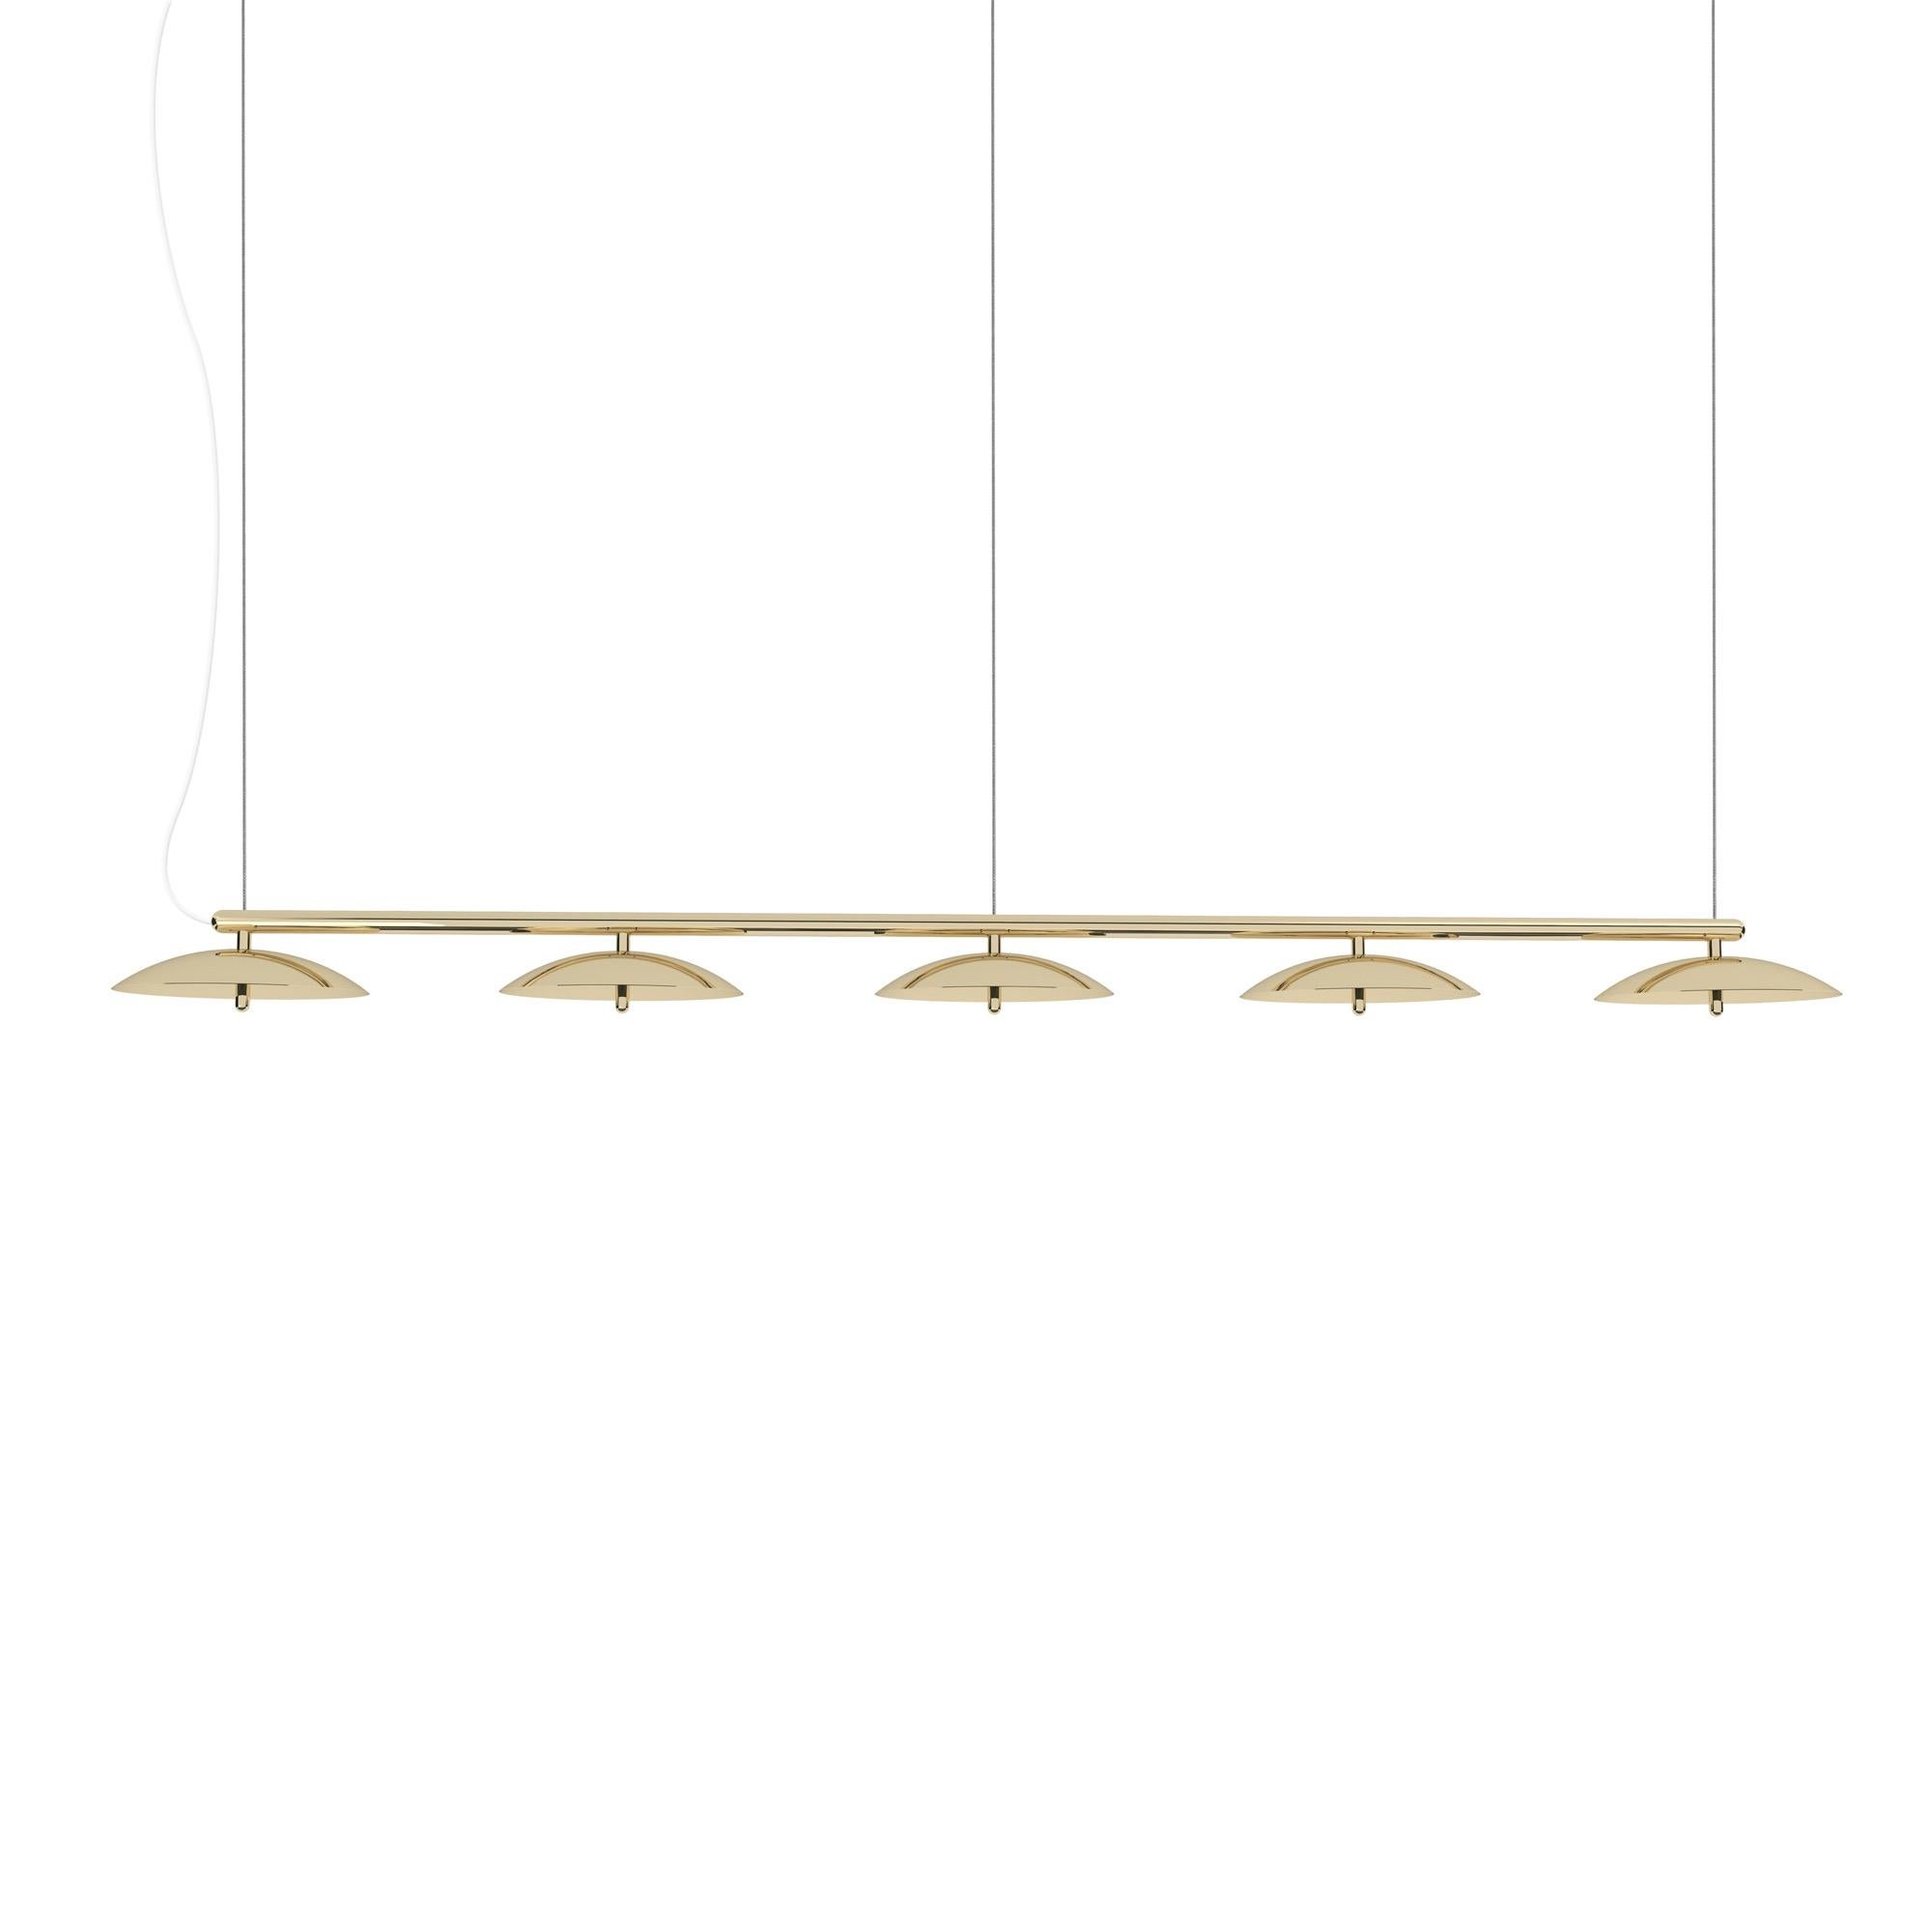 Perfect above a dining table or a conference table, the Signal Linear Pendant is a decidedly modern linear suspension light. A polished metal arm effortlessly supports spun metal shades that cast a downward glow through perforated diffusers. The